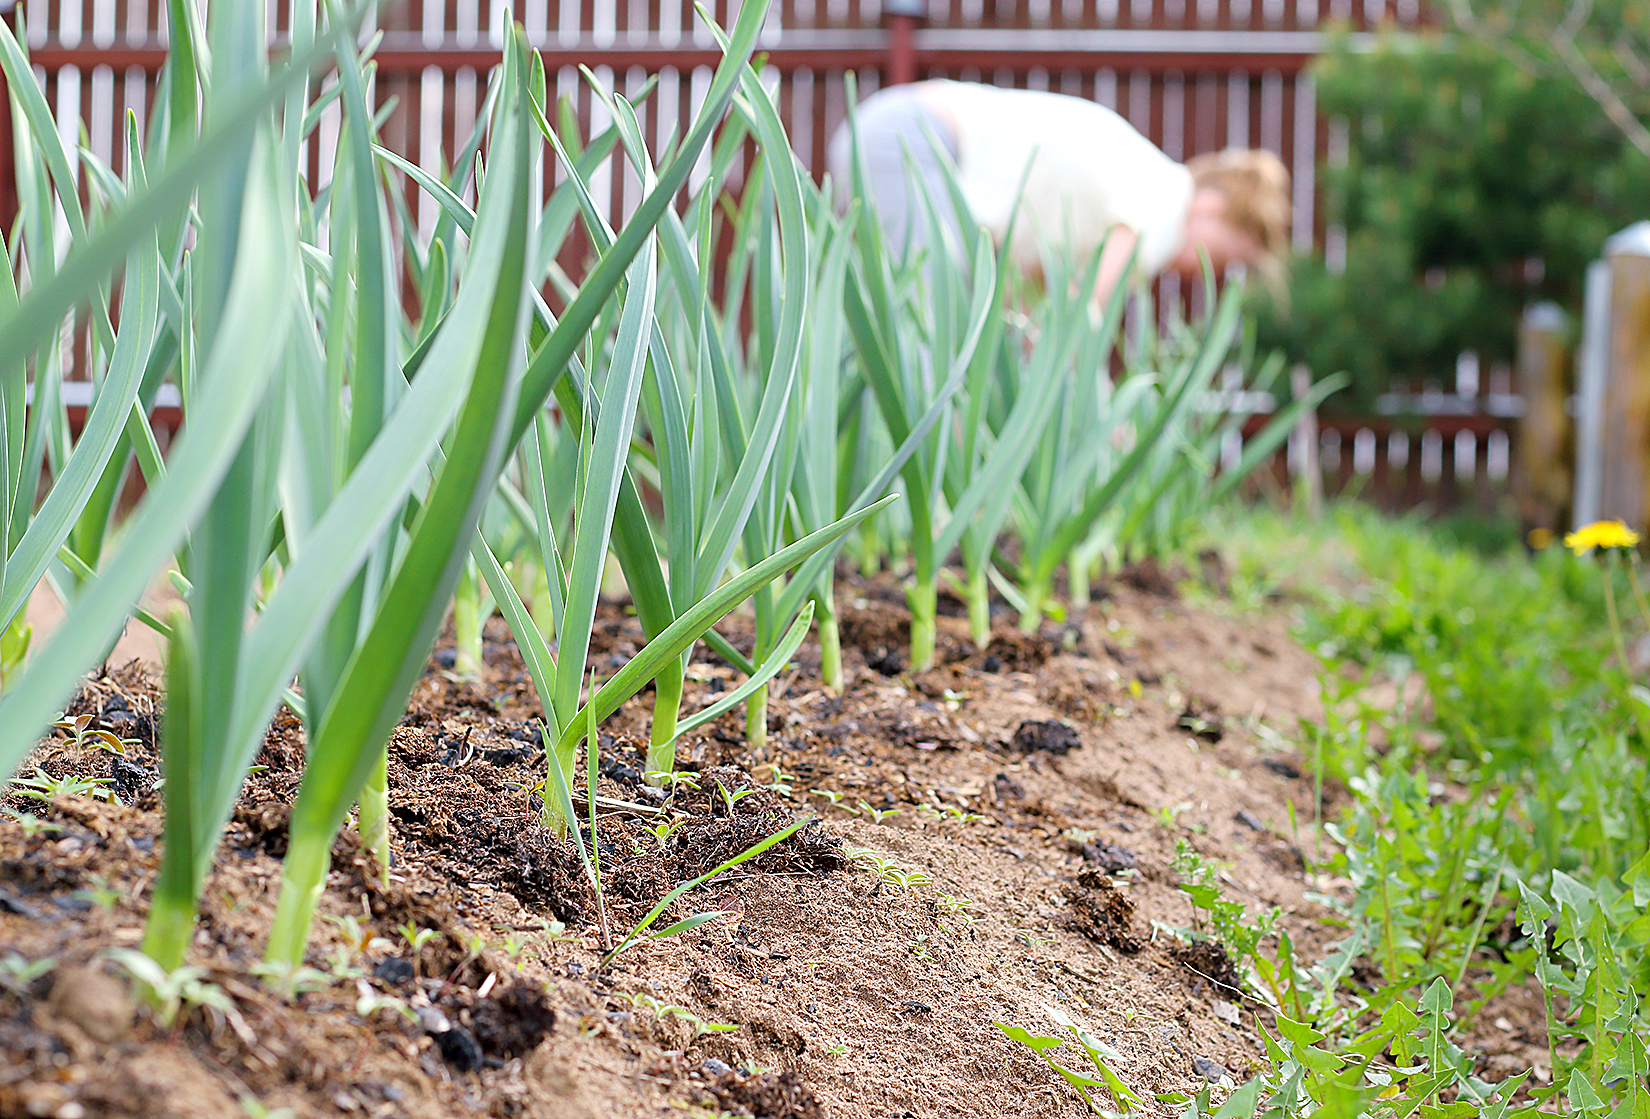 Working in the garden. A garden bed of young green garlic.